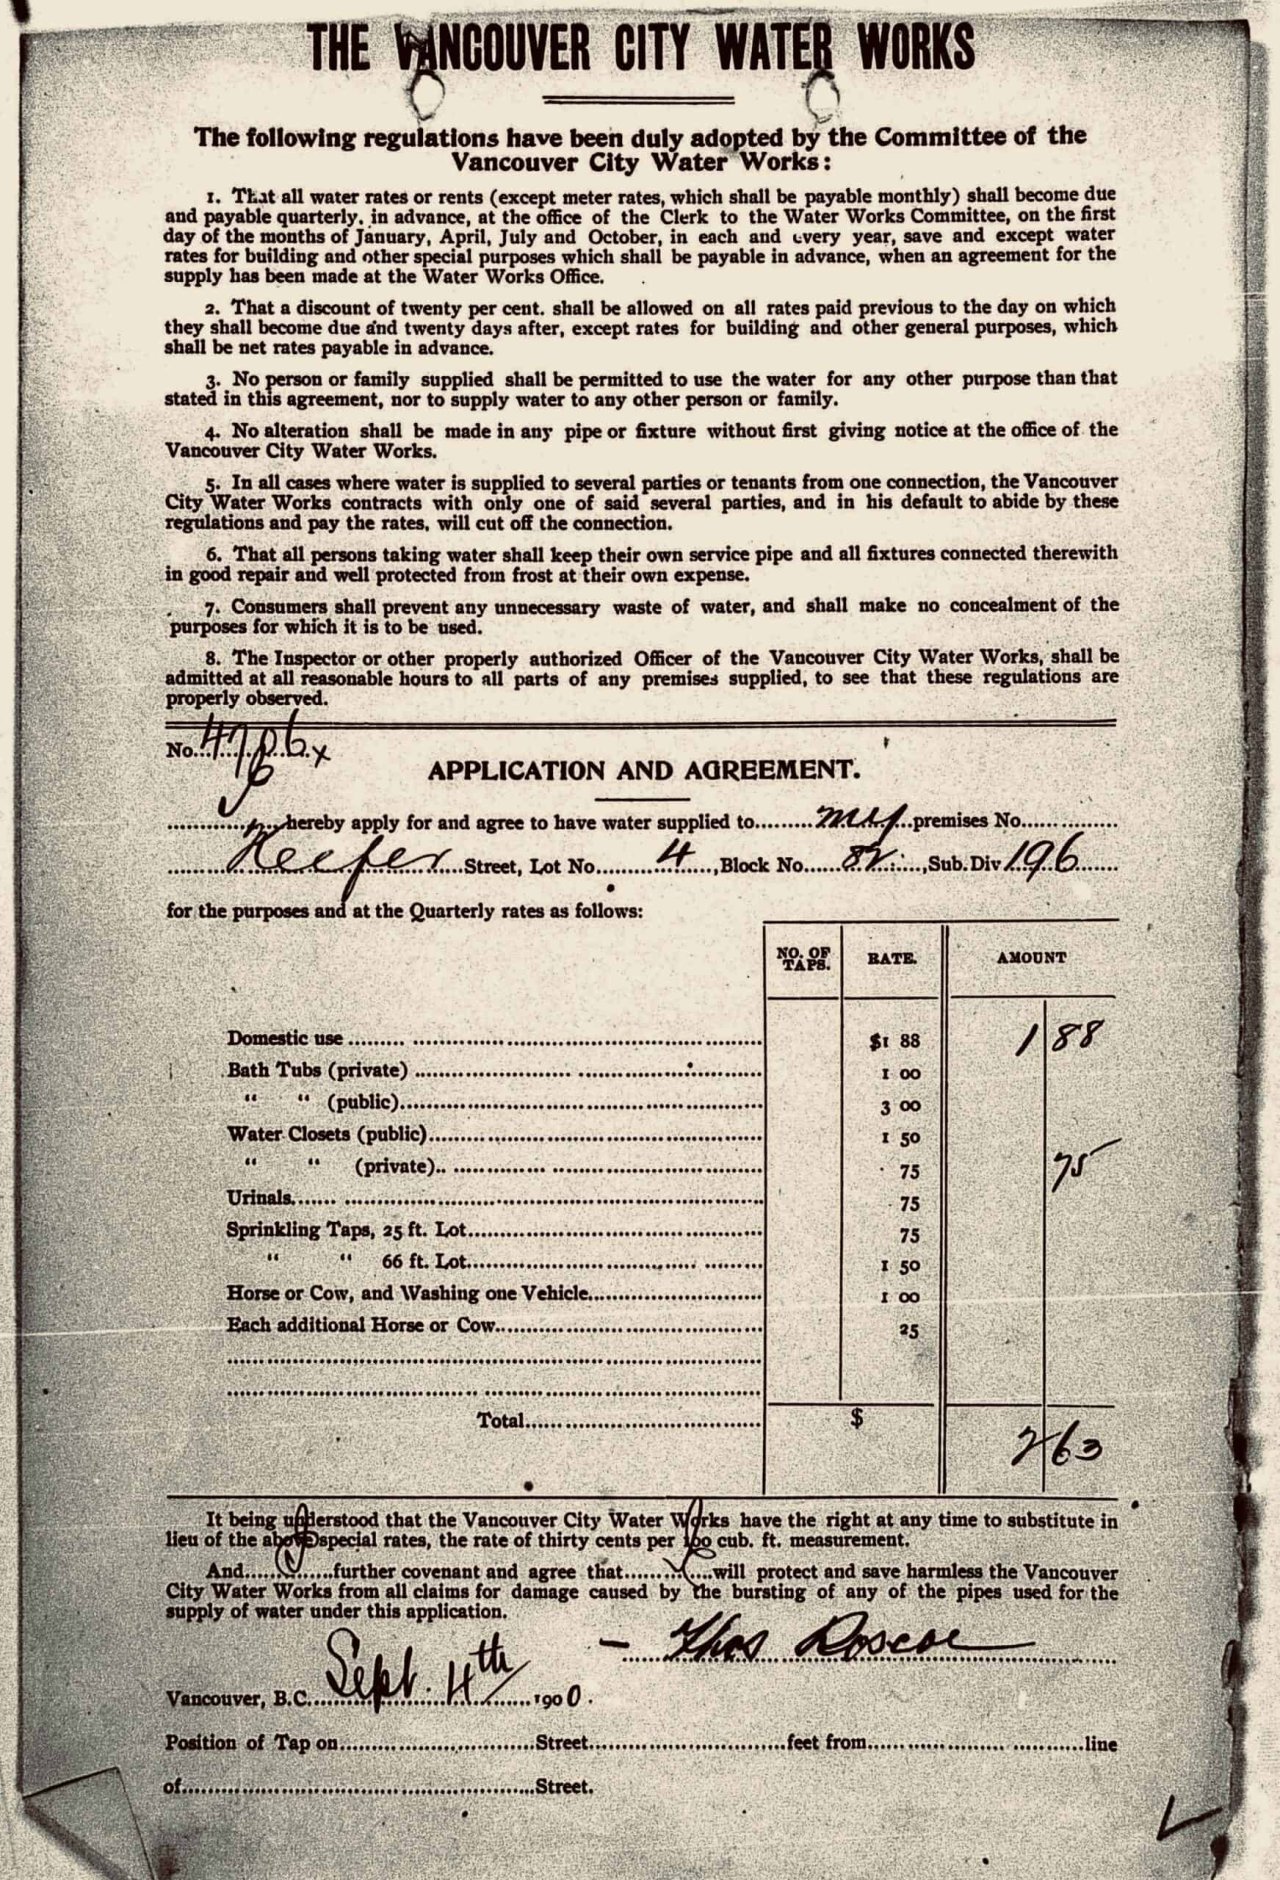 Water Permit from September 4, 1900 for the Roscoe Residence (818 Keefer Street).